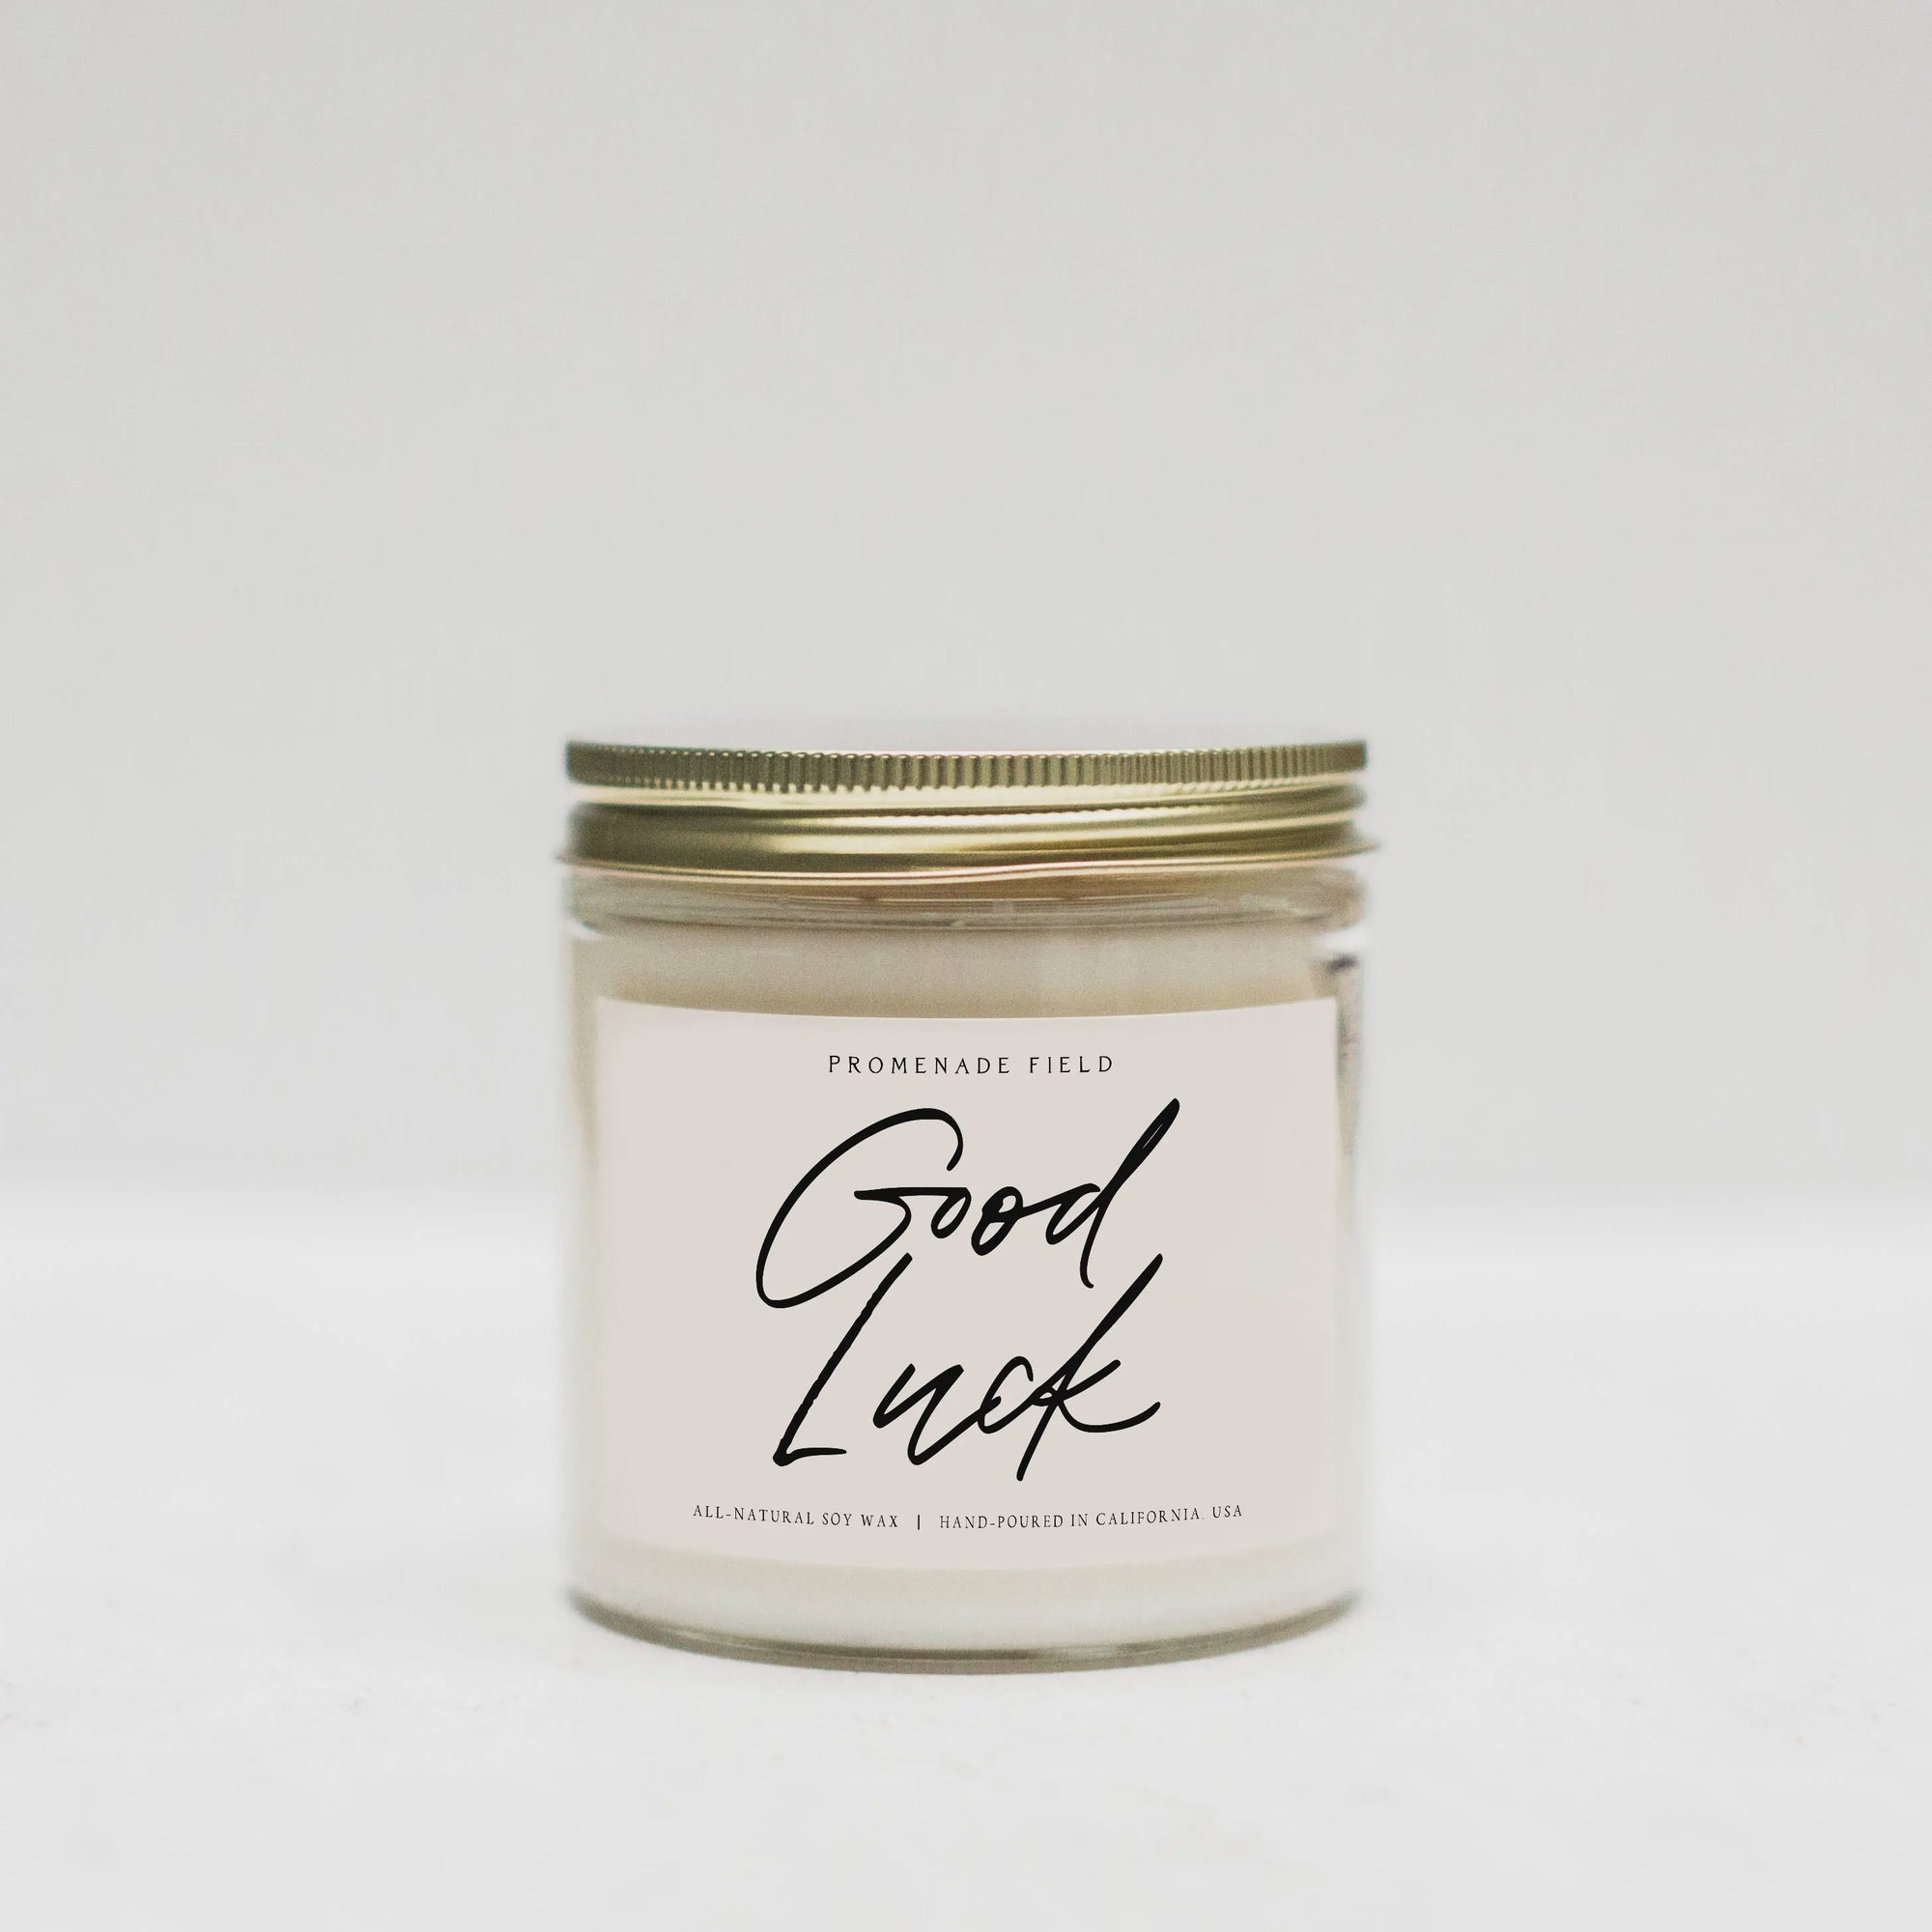 The Good Luck Soy Candle